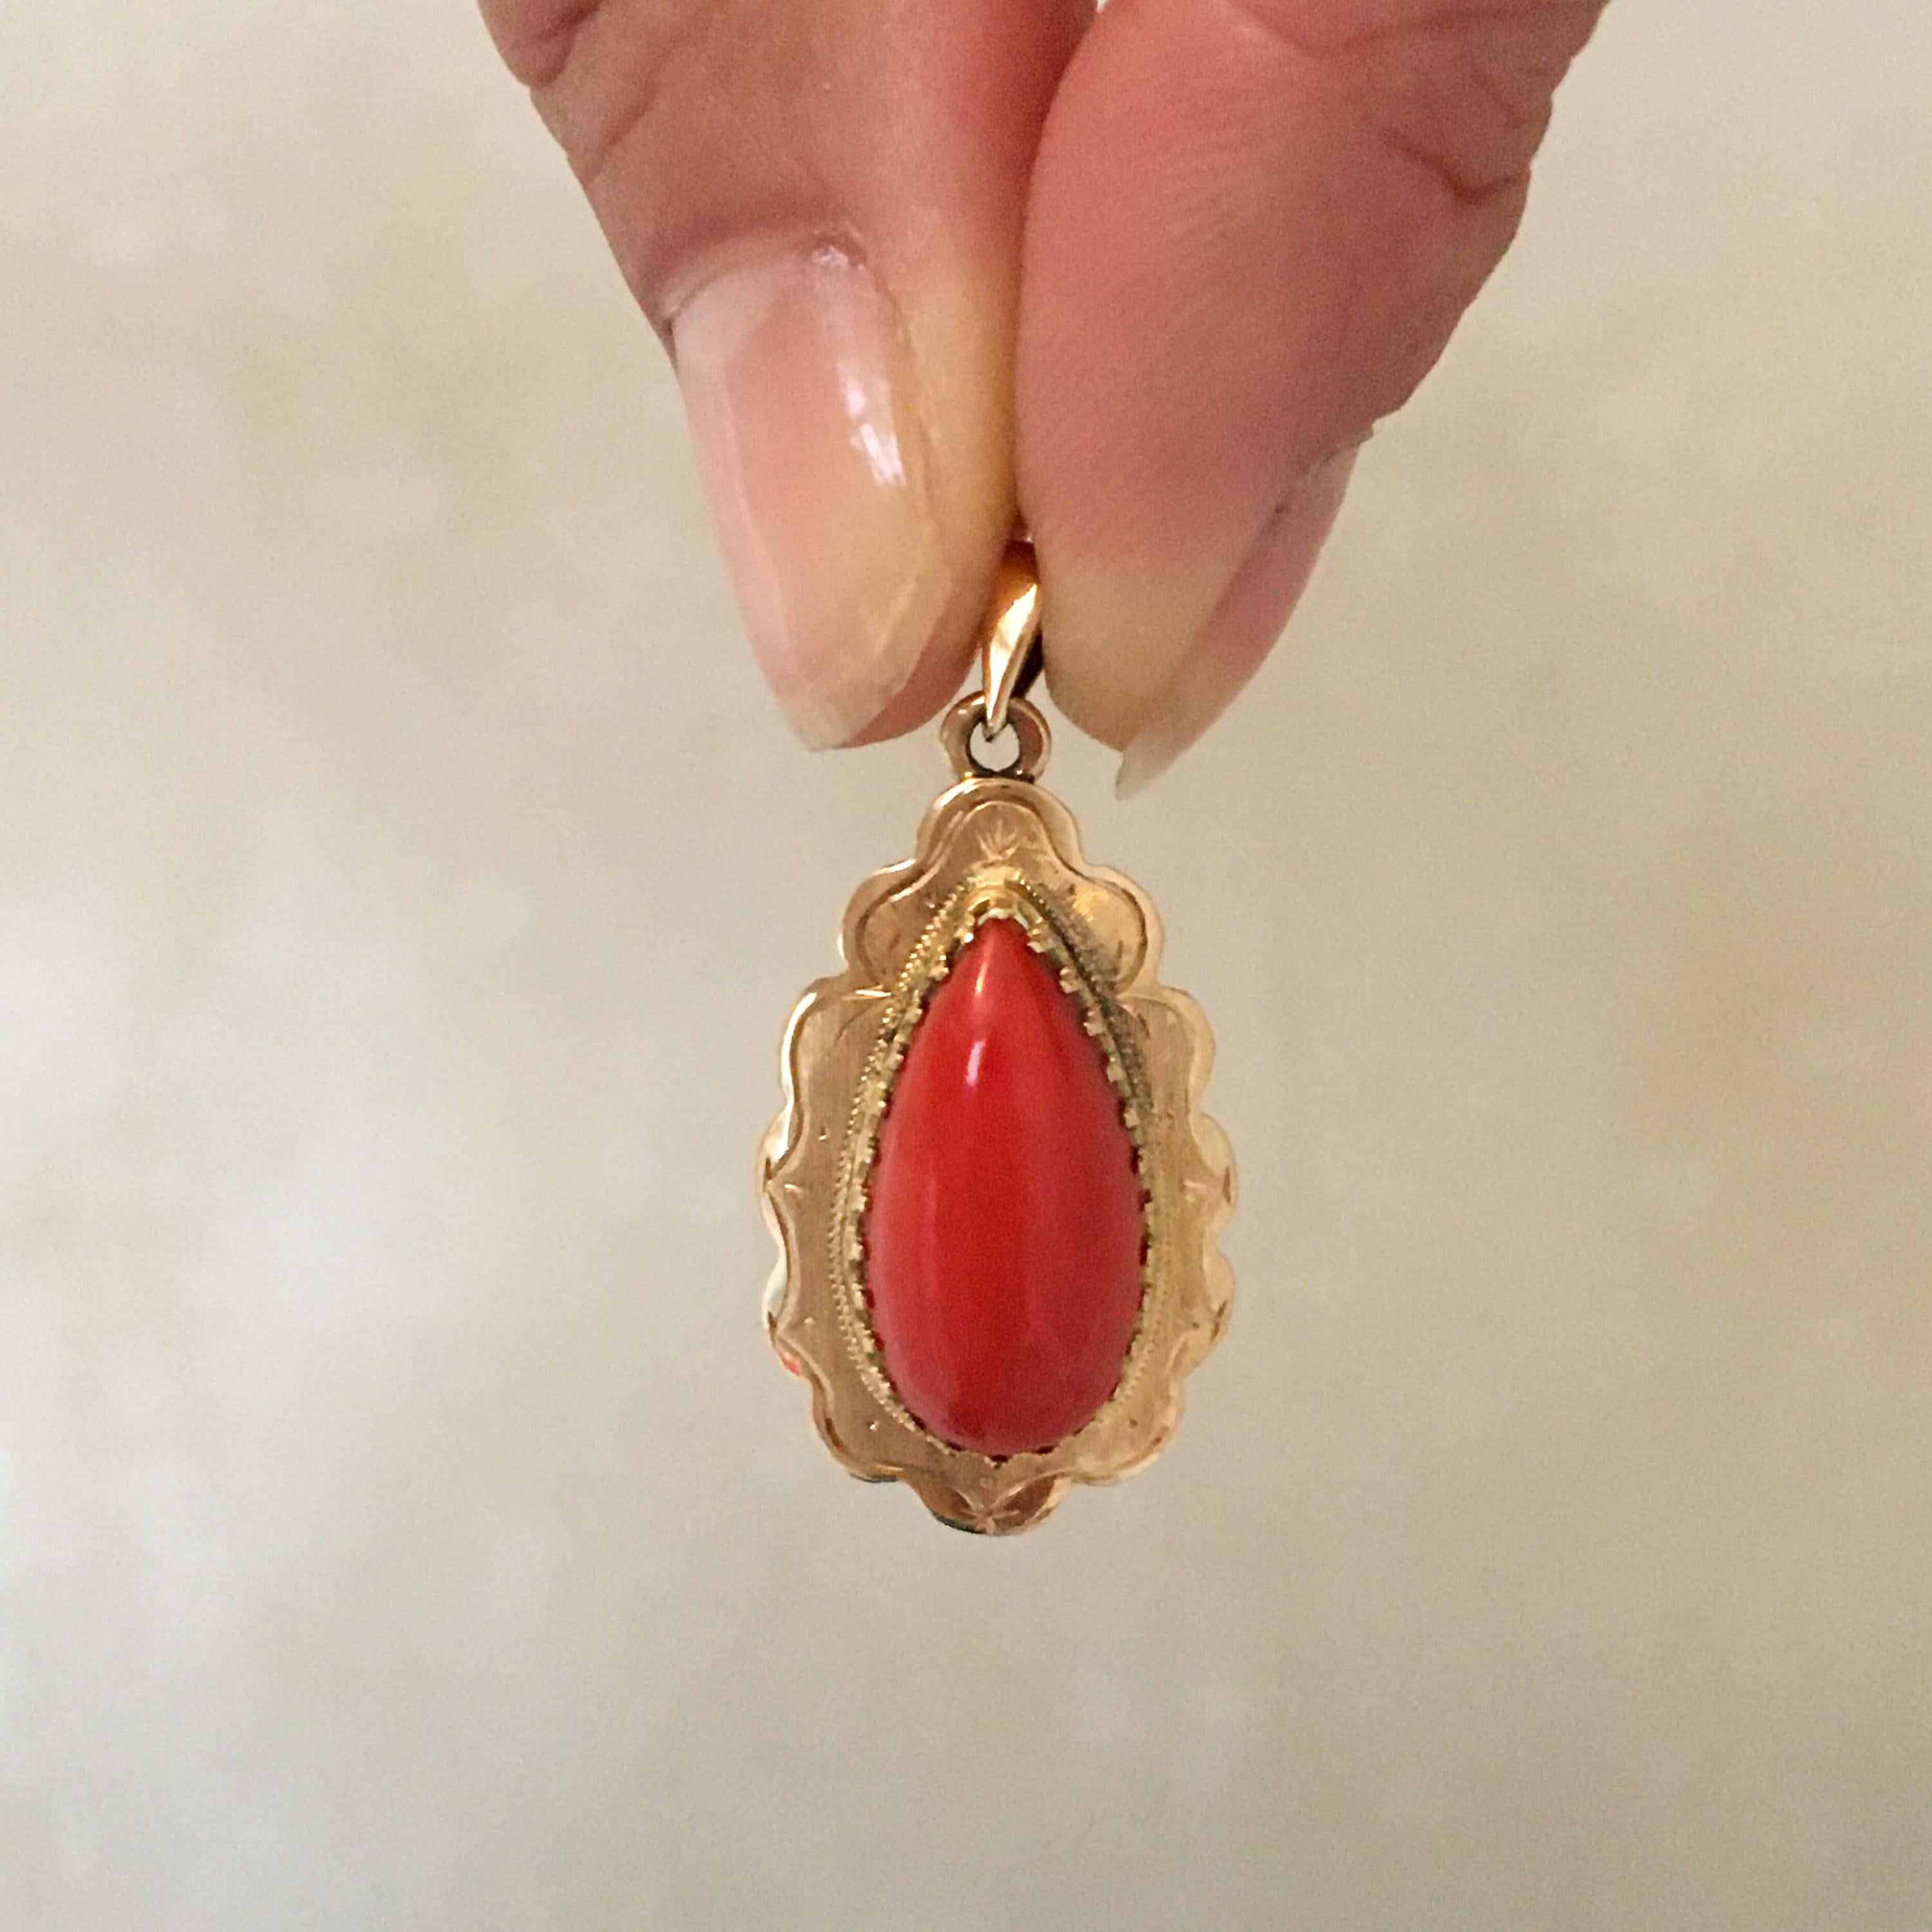 Women's 14K Gold Red Coral Cabochon Pendant